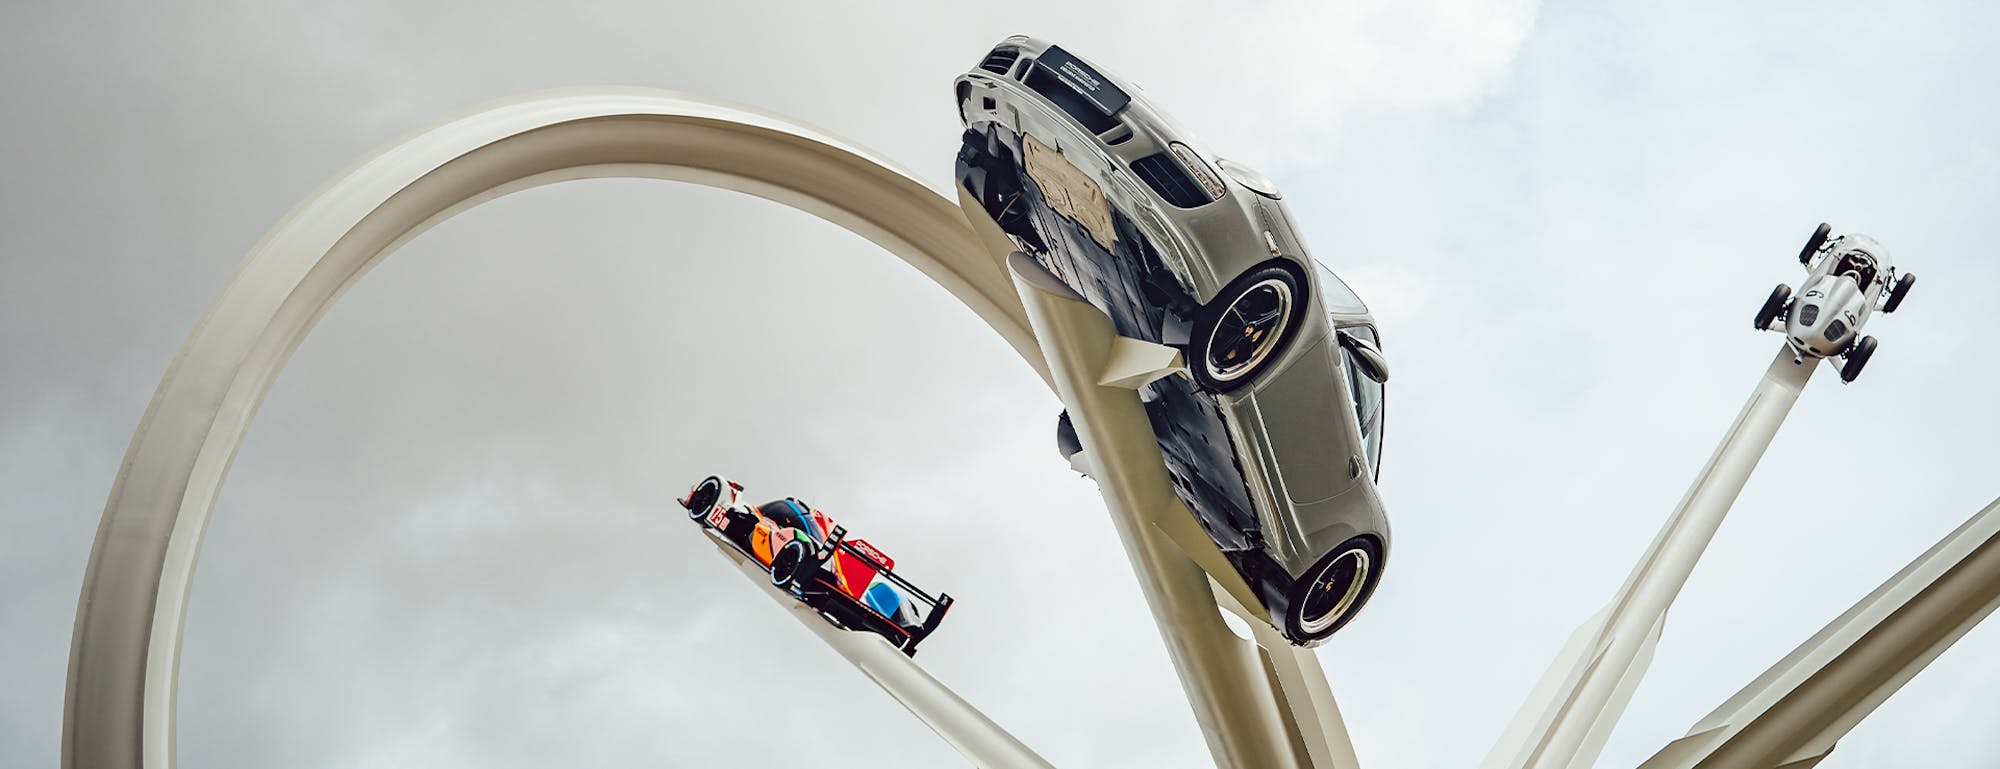 Central feature of Porsche cars at Goodwood Festival of Speed